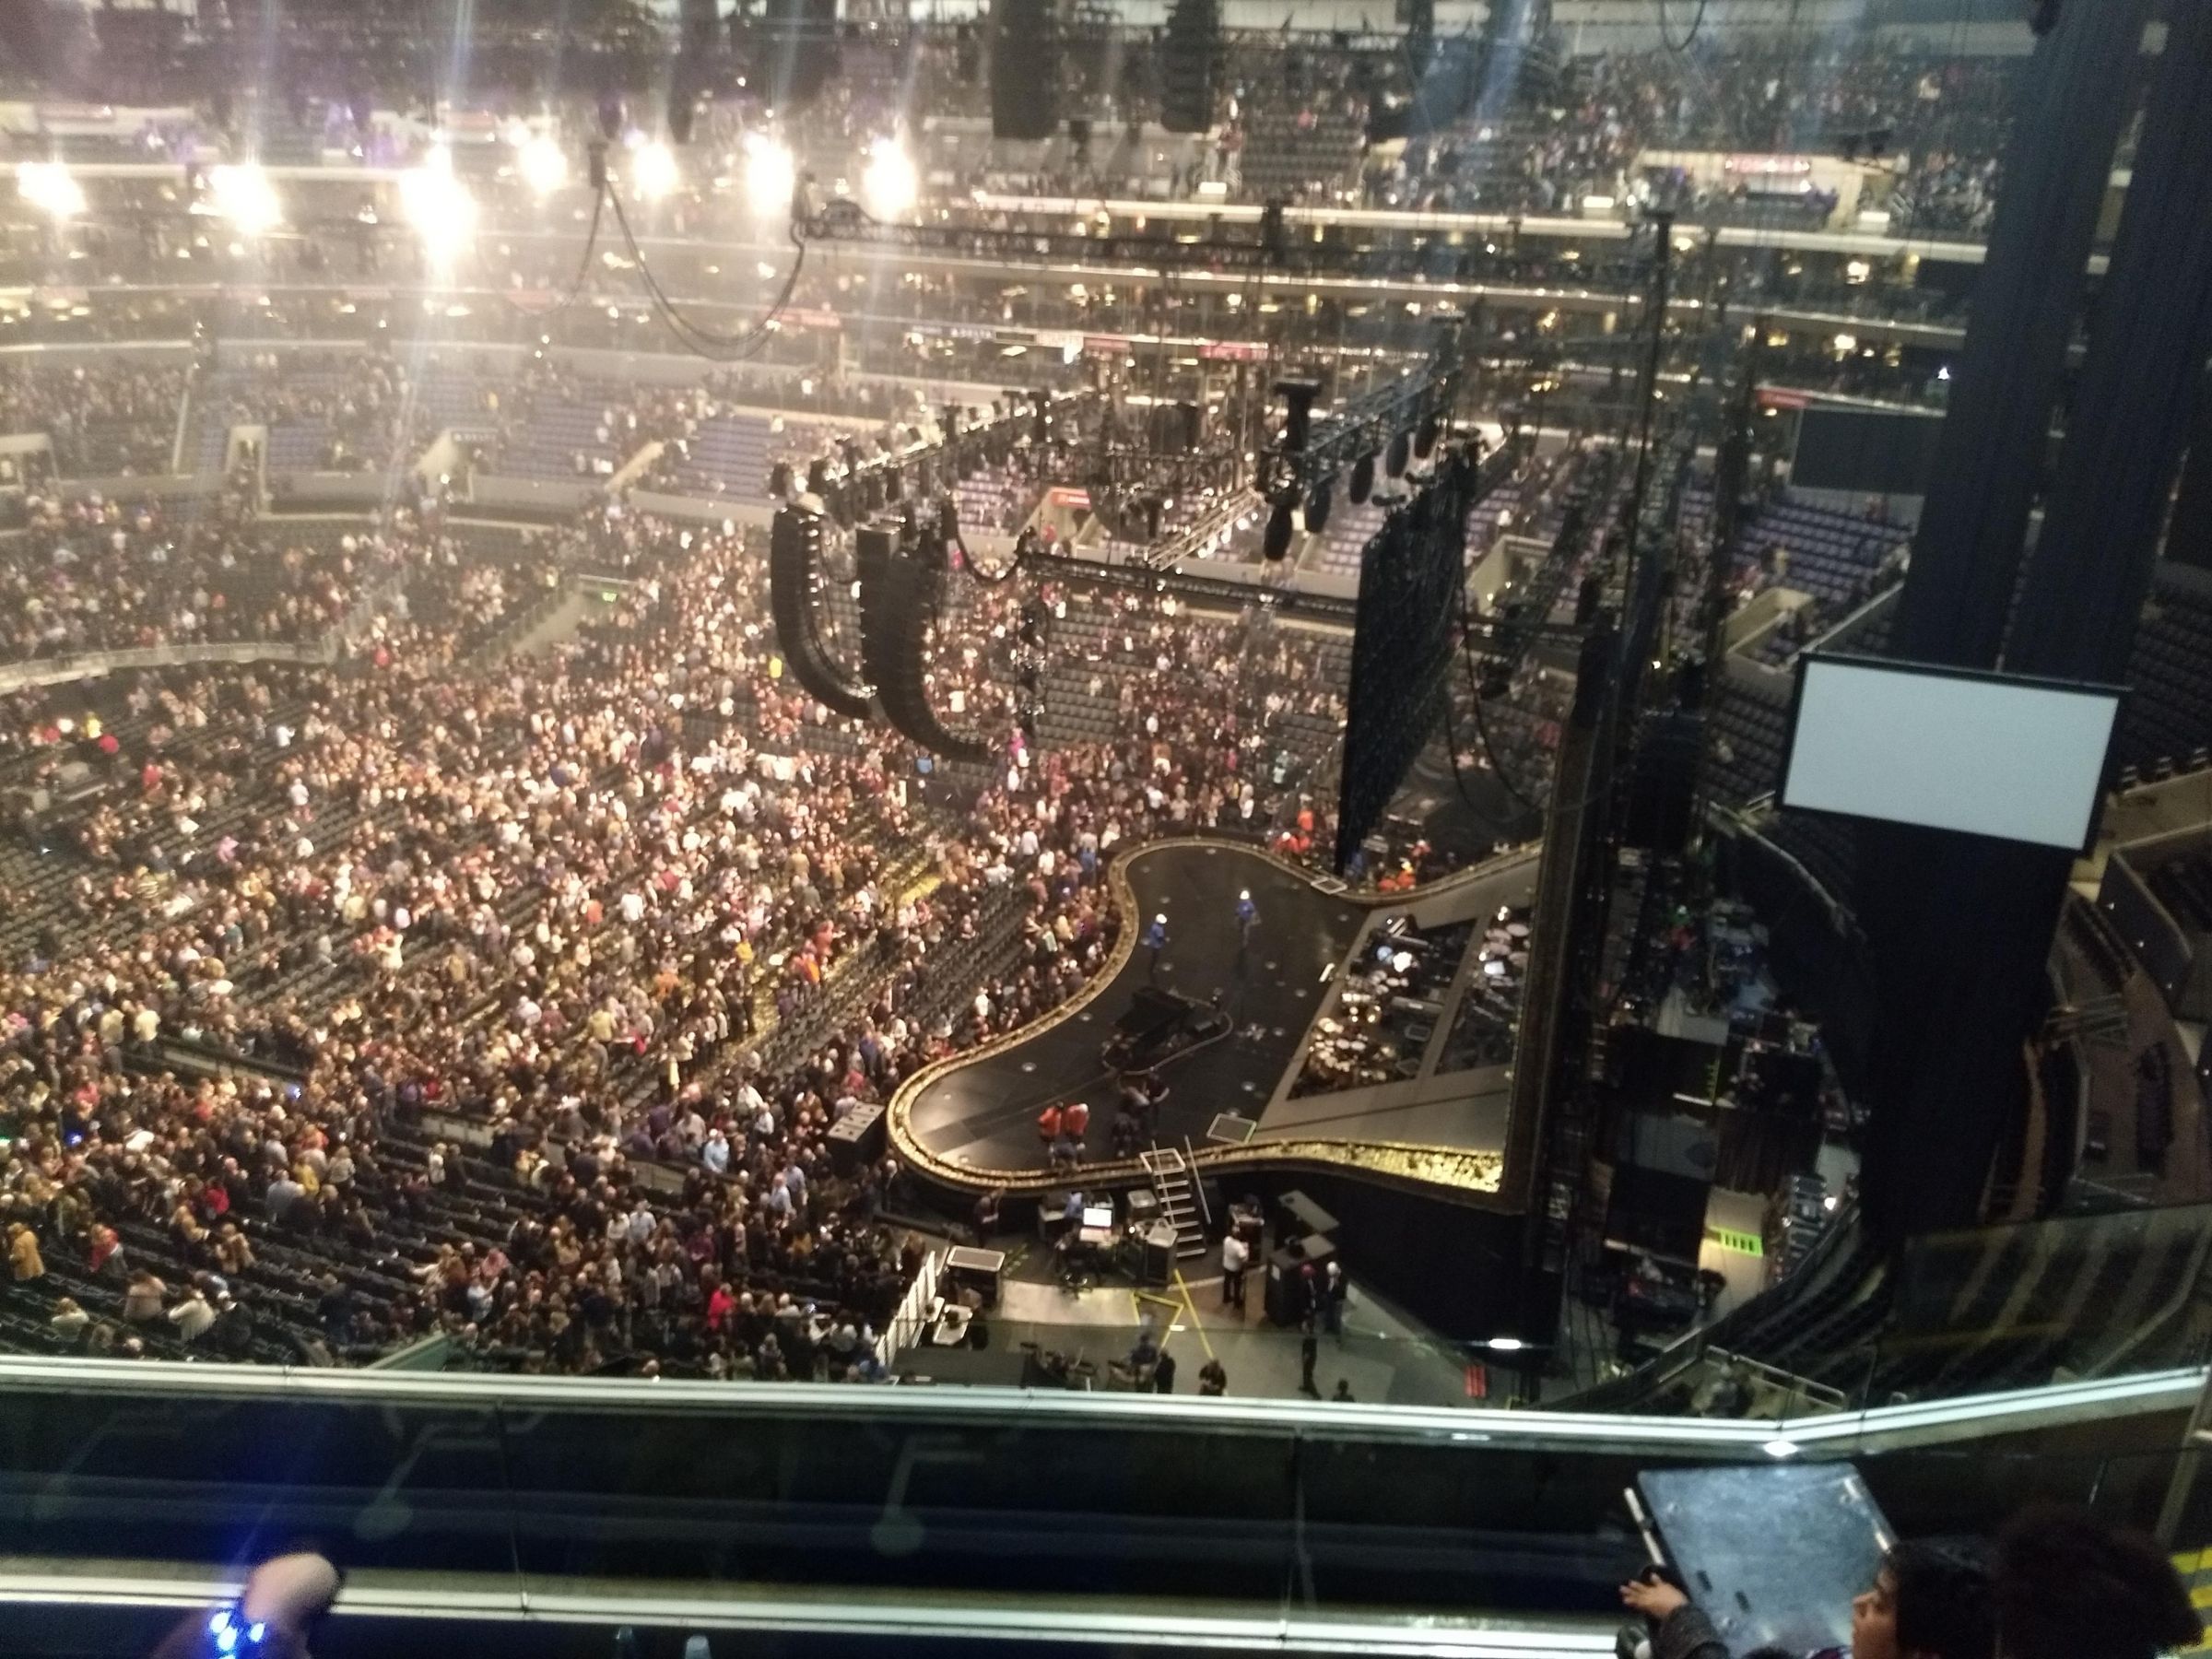 section 332, row 6 seat view  for concert - crypto.com arena